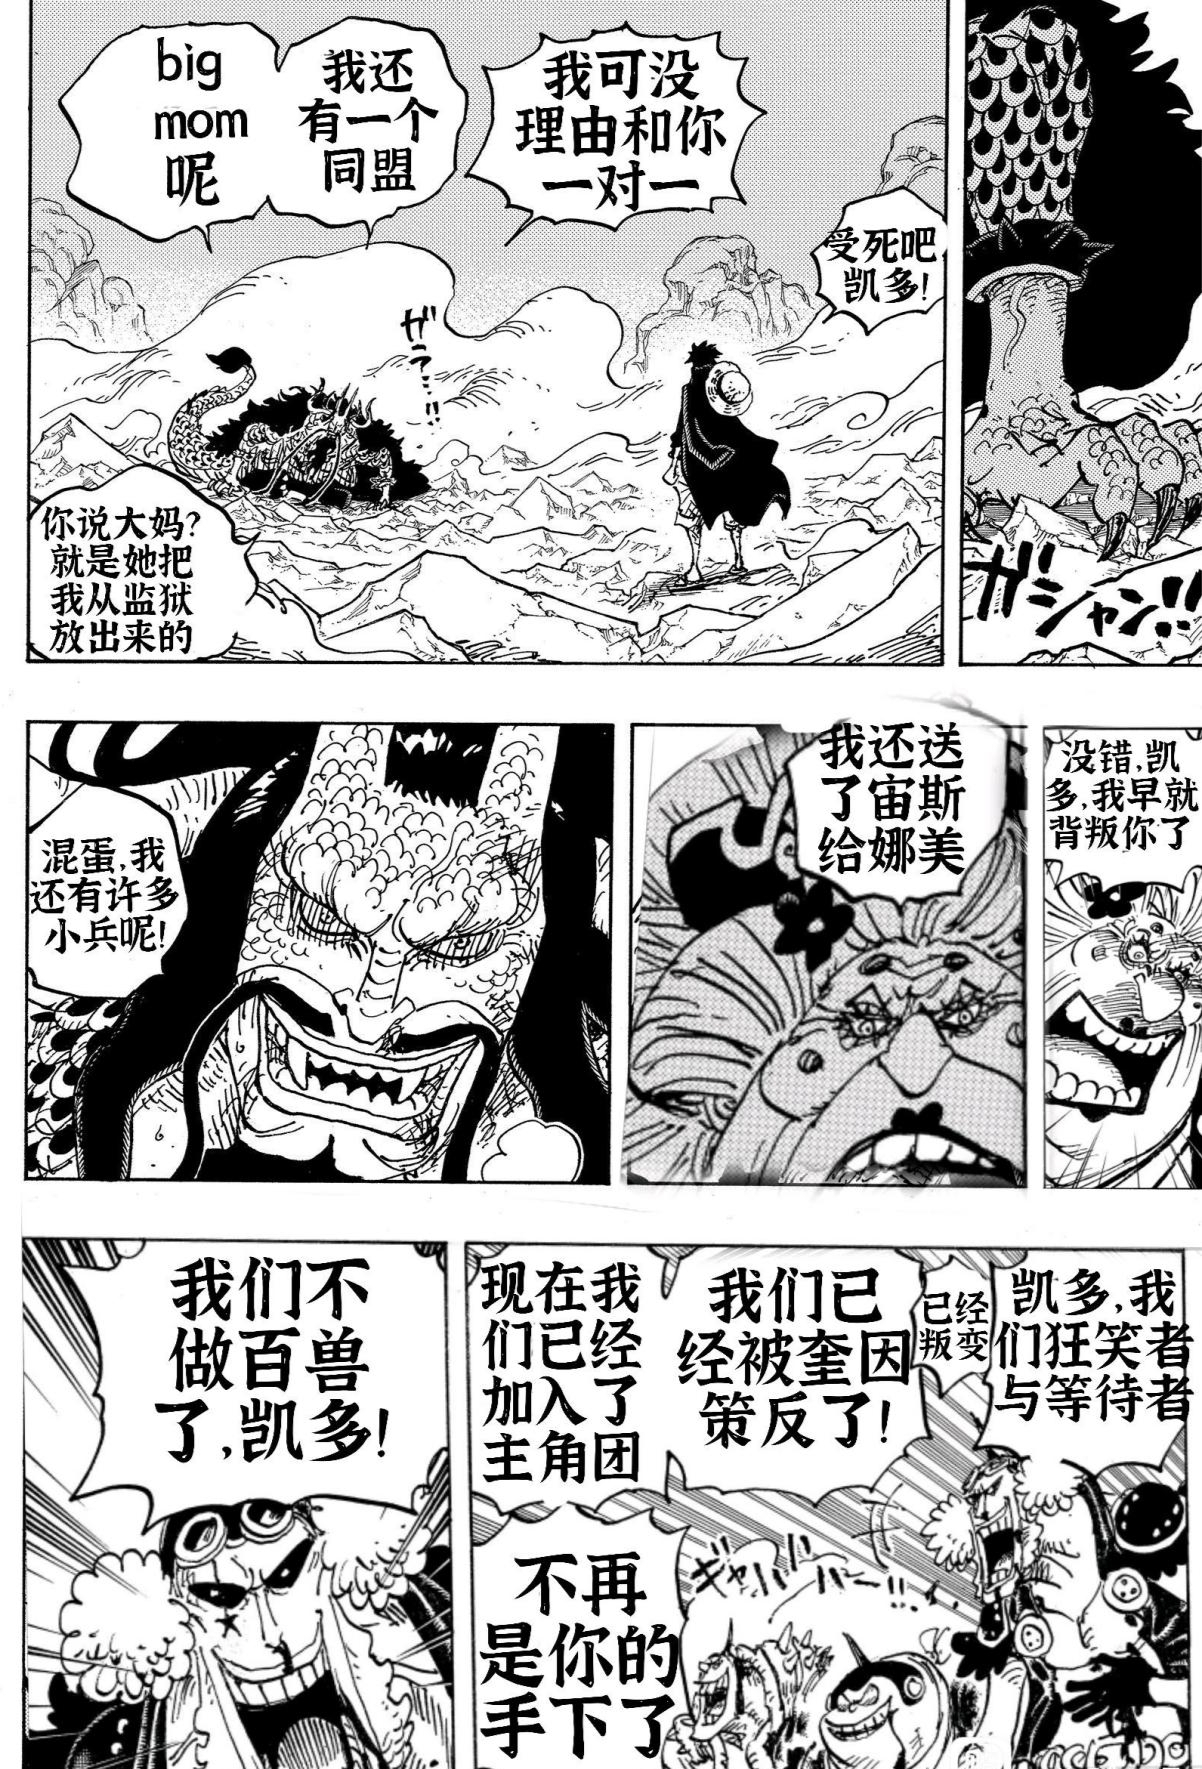 One Piece Chapter 1019 Fanren Kaido Is Brutally Rebelled By His Subordinates Yamato Destroys His Relatives And Defeats His Father Minnews